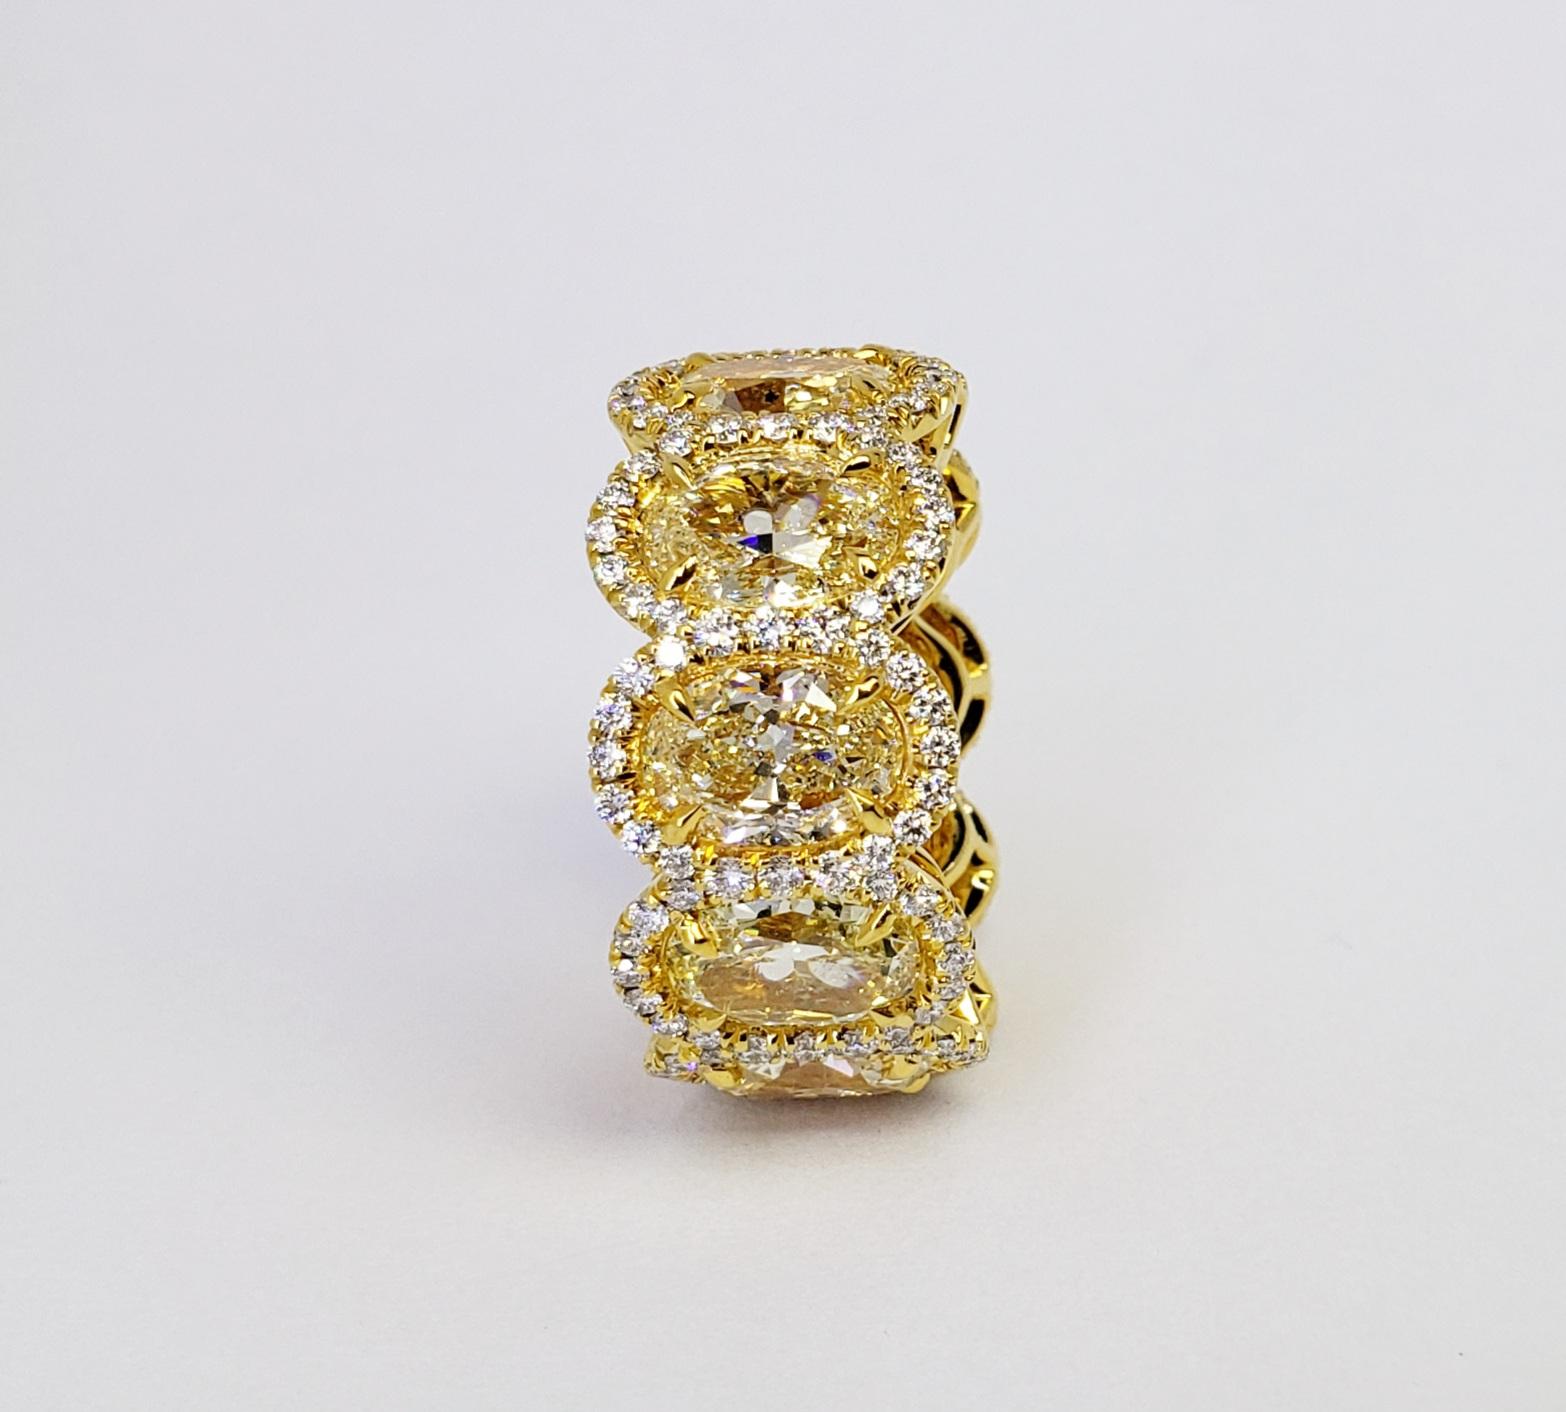 Rosenberg Diamonds & Co. 10.64 total carat weight Oval shape Light Yellow – Fancy Light Yellow SI1 – VVS1 clarity. This beautiful Yellow Oval diamond eternity band is set in 18 karat yellow gold, with ten Oval diamonds each stone weighing just over